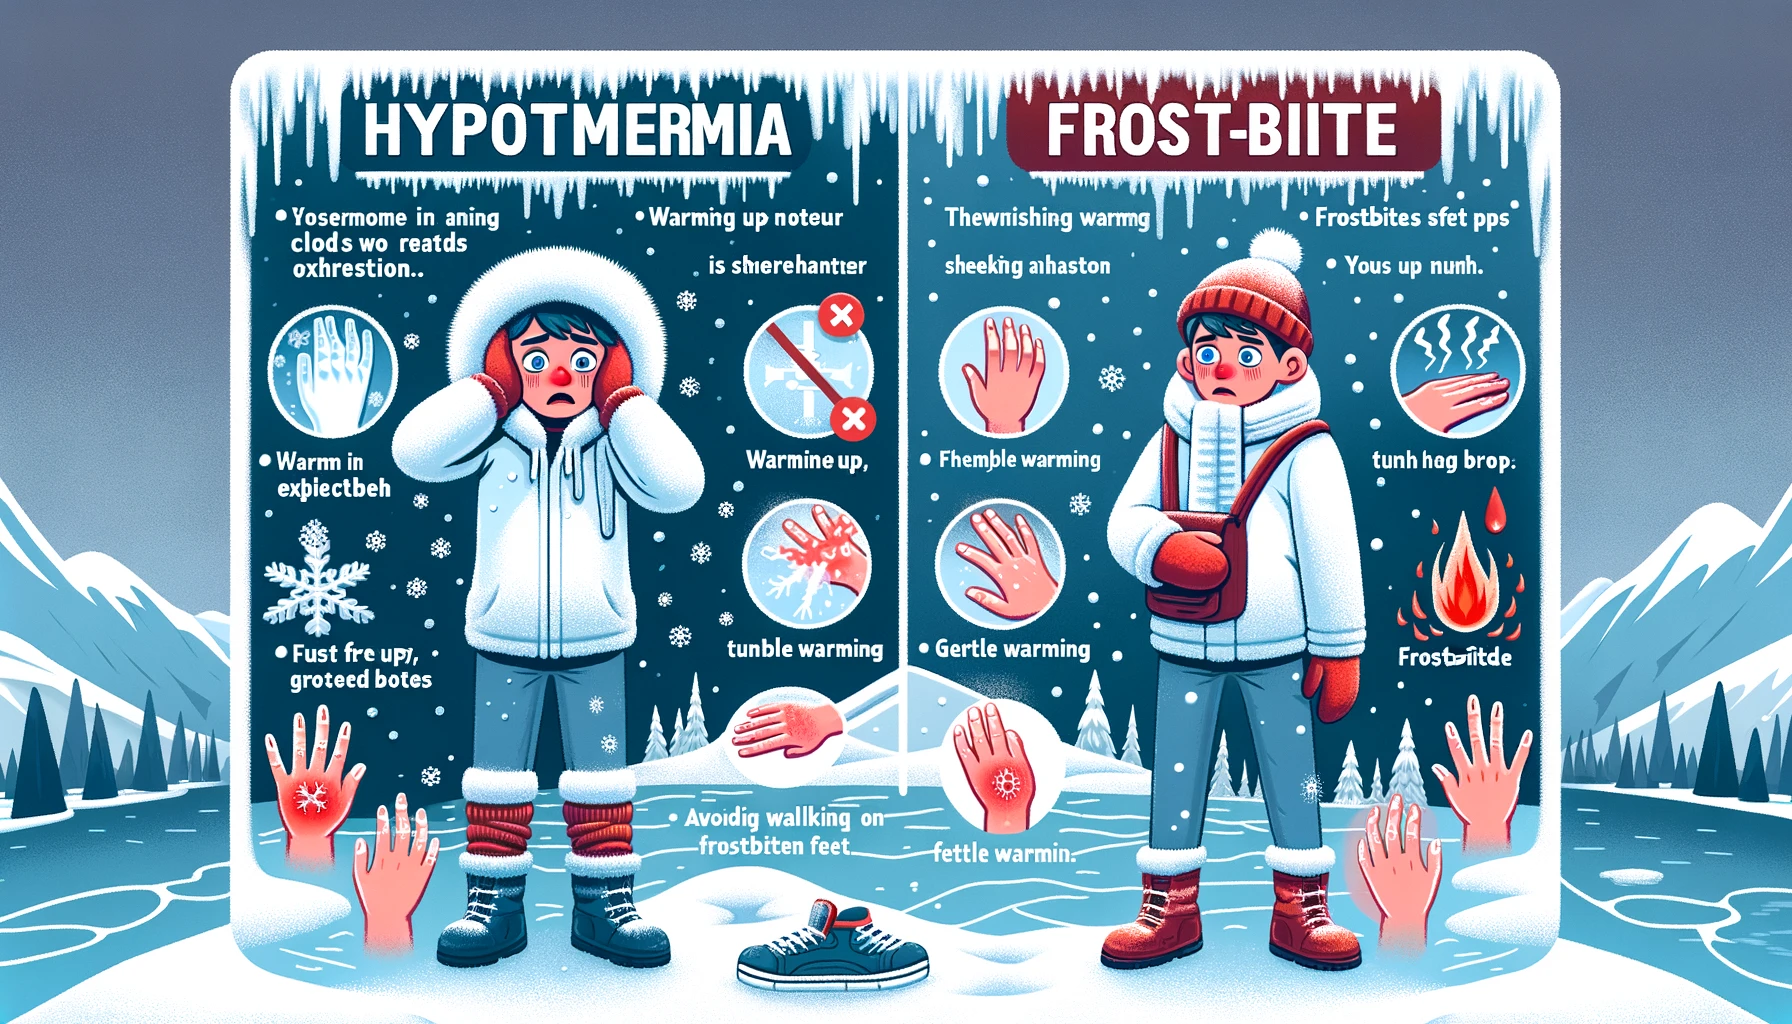 Hypothermia and Frostbite